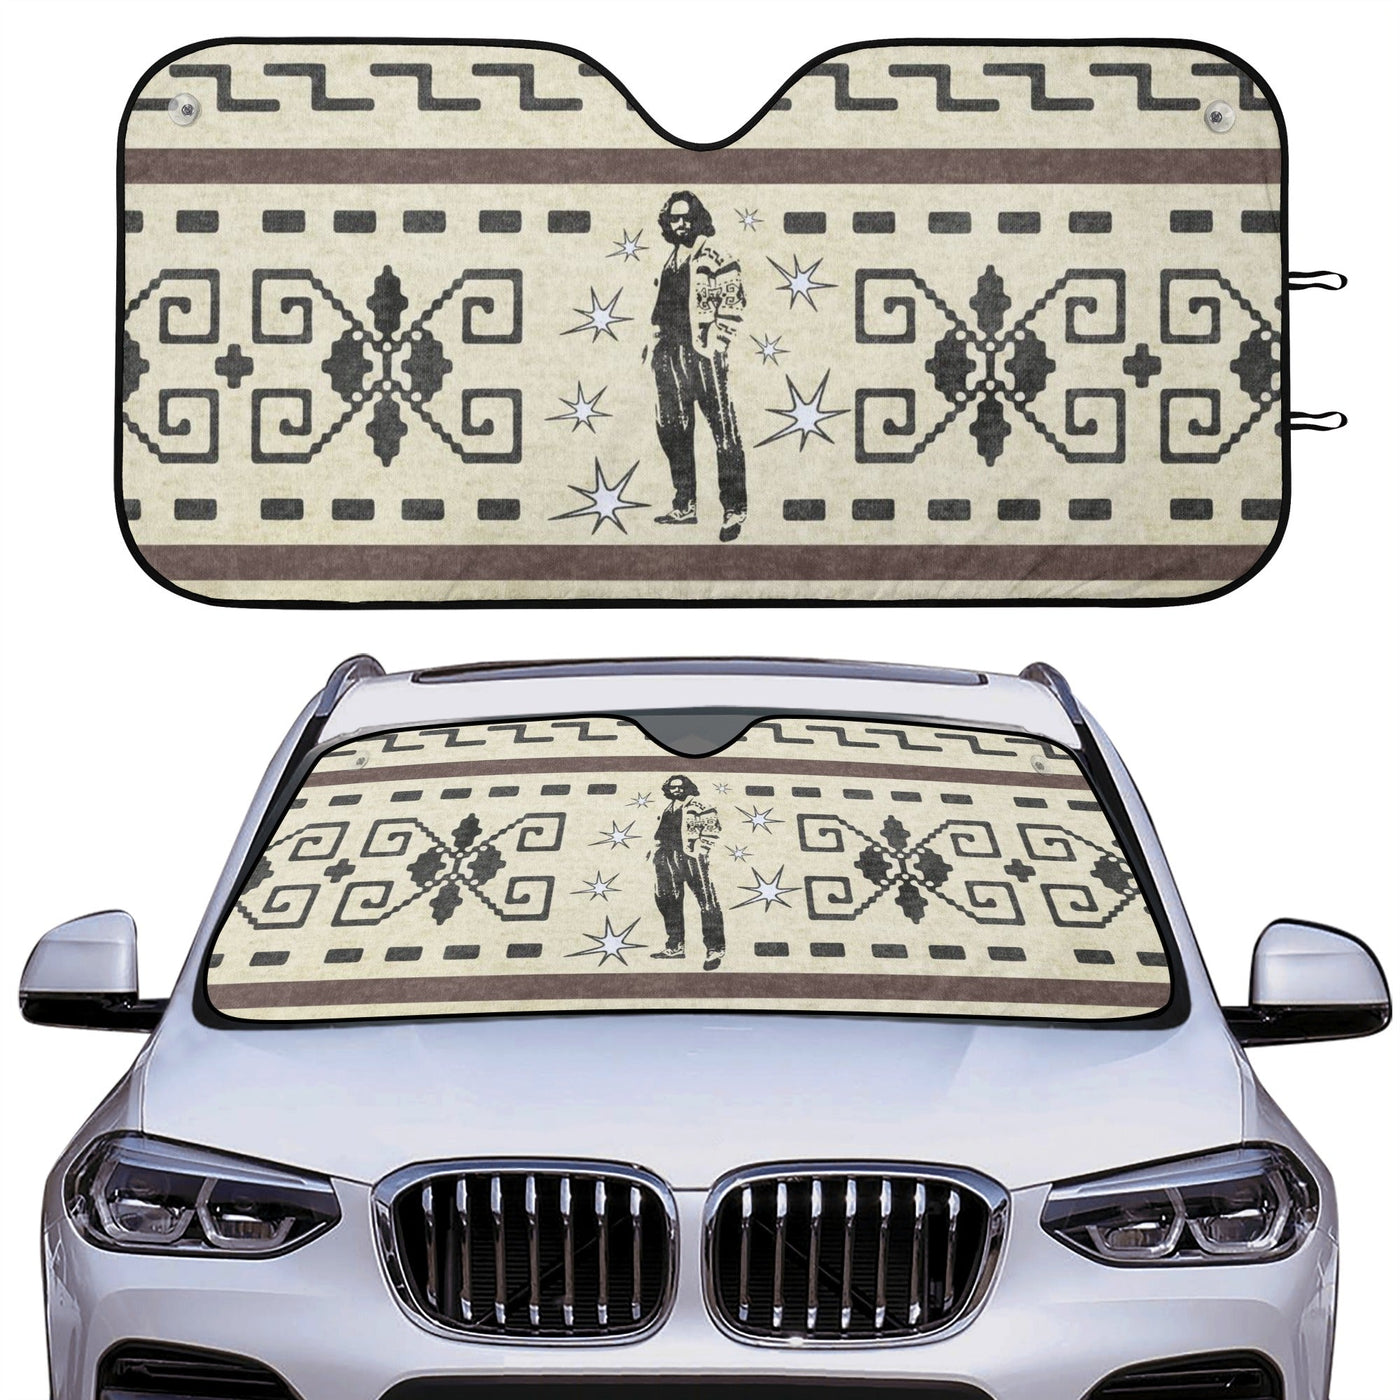 The Dude's Car Windshield Sun Shade with Big Lebowski's Iconic Silhouette